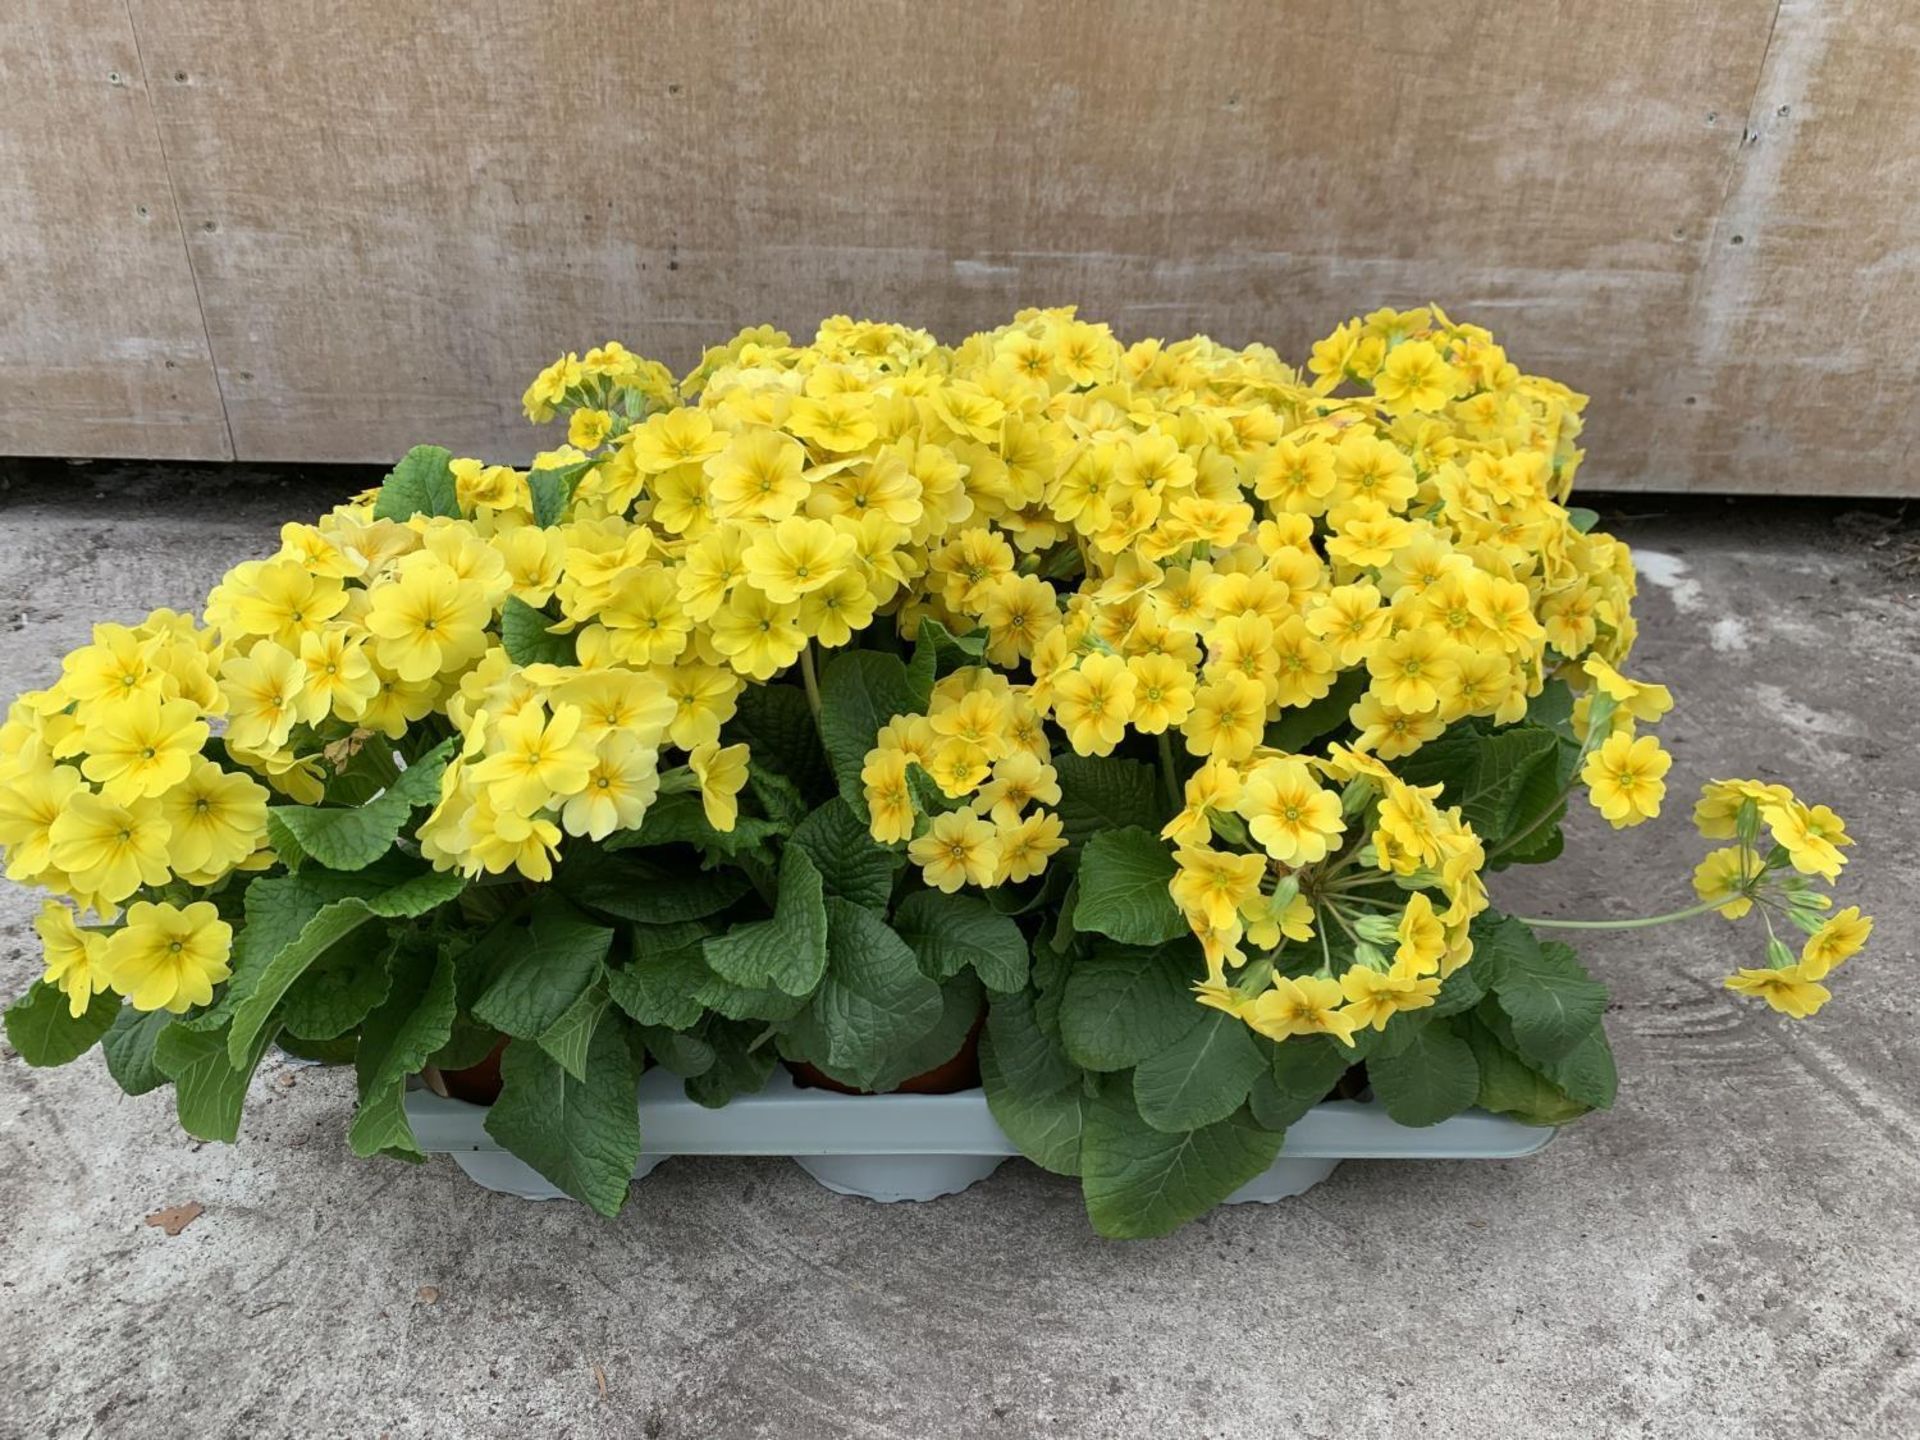 SIX GOLDEN NUGGET SCENTED YELLOW POLYANTHUS PLUS VAT TO BE SOLD FOR THE SIX - Bild 4 aus 4